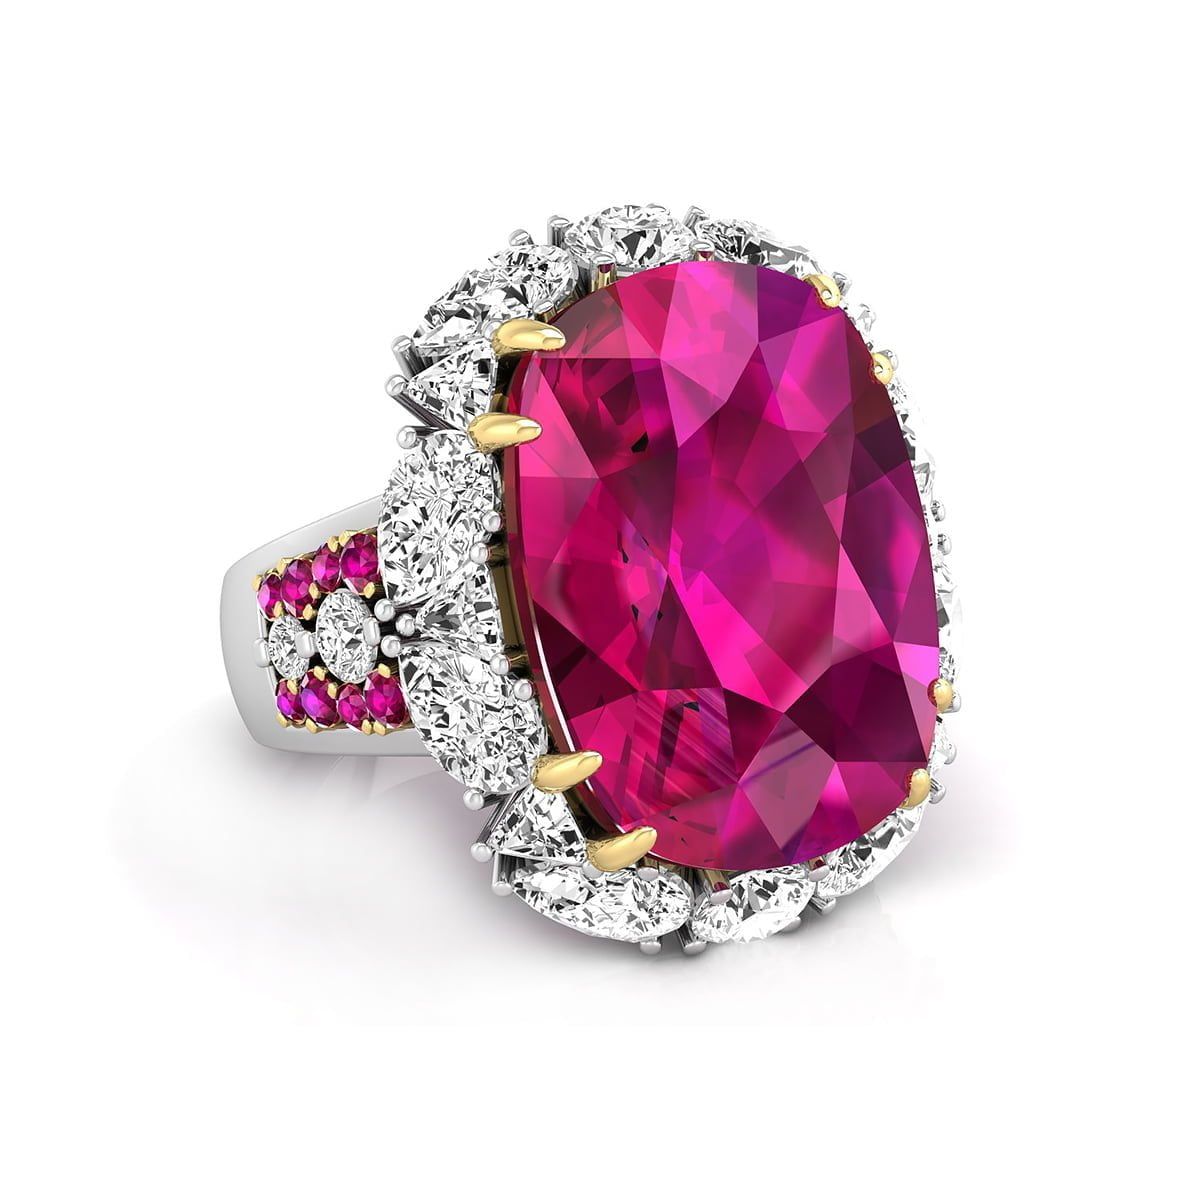 18x13 MM Pink Cushion Cut CZ Stone Halo Cocktail Ring For Party Wear Or Wedding